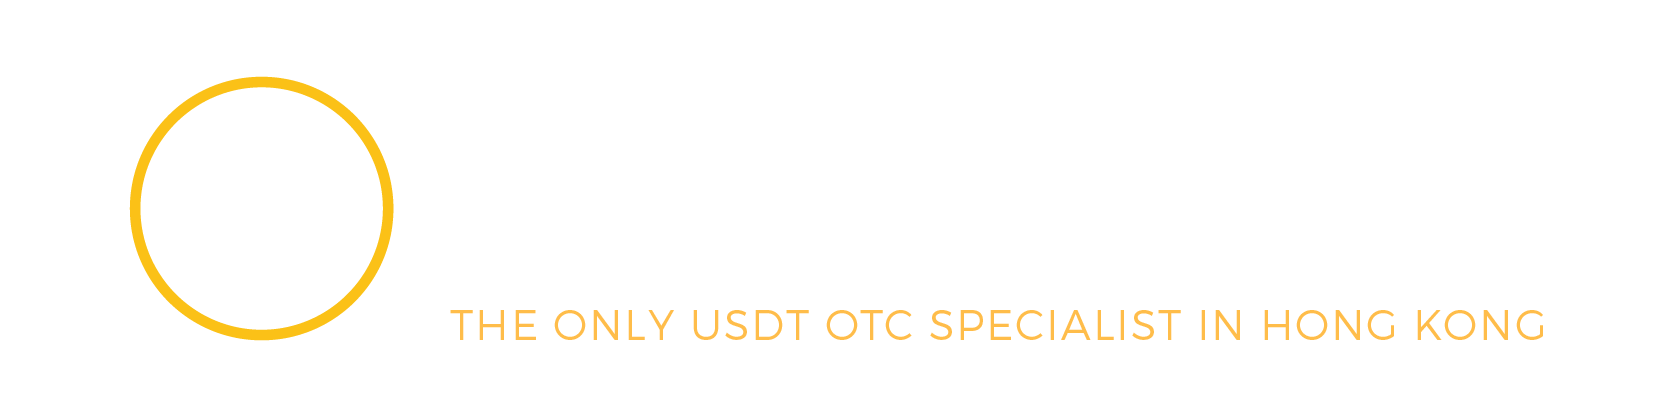 coinmag.fun | 1 ways to buy USDT in China with USD